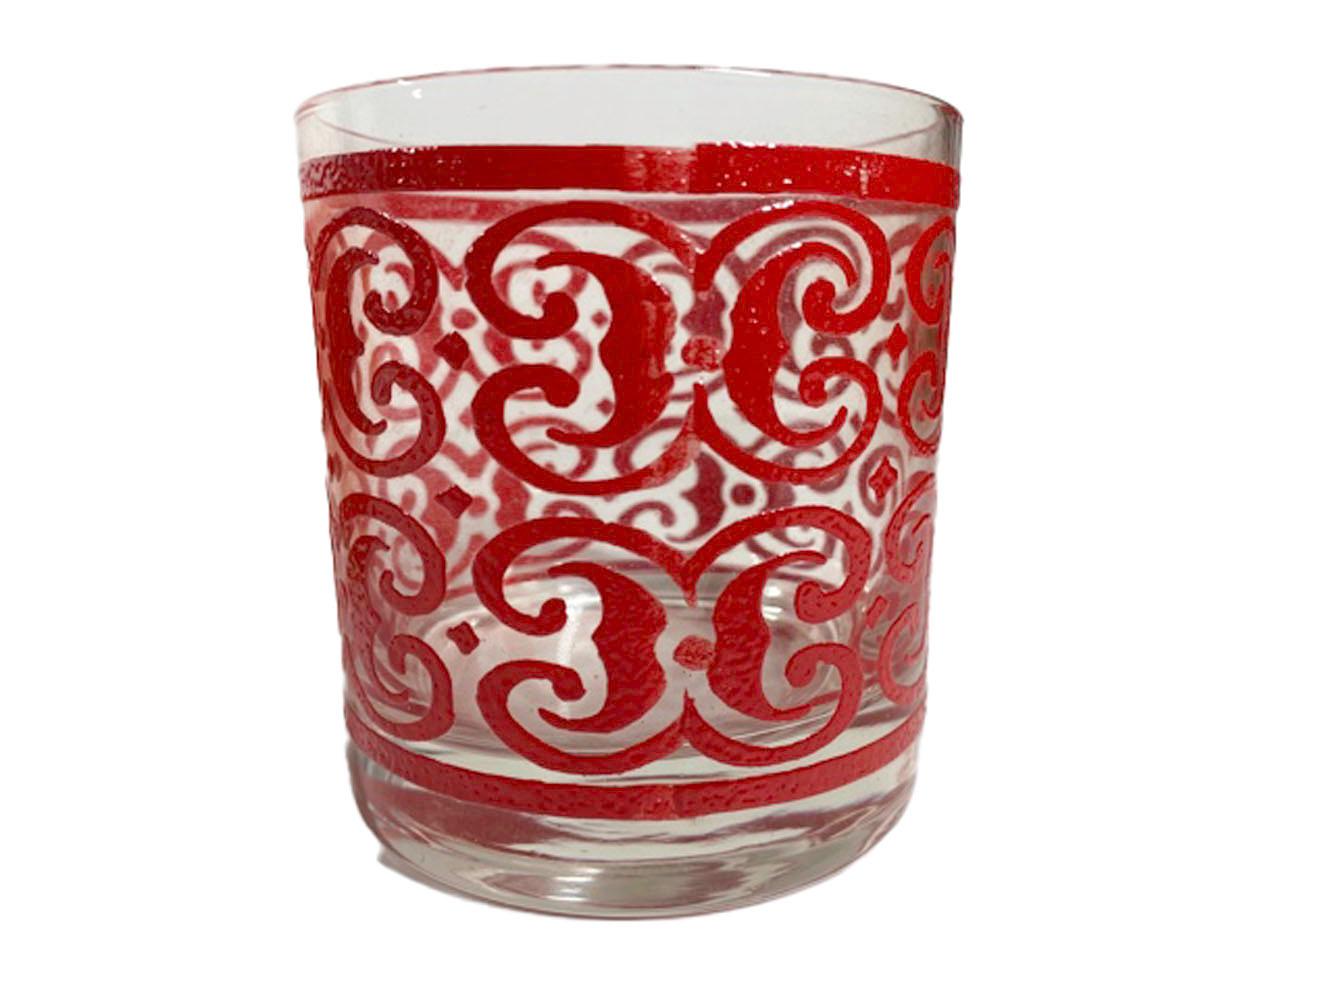 American Set of 8 W. Virginia Rocks Glasses in the Castile Pattern, 2 Each of 4 Colors For Sale